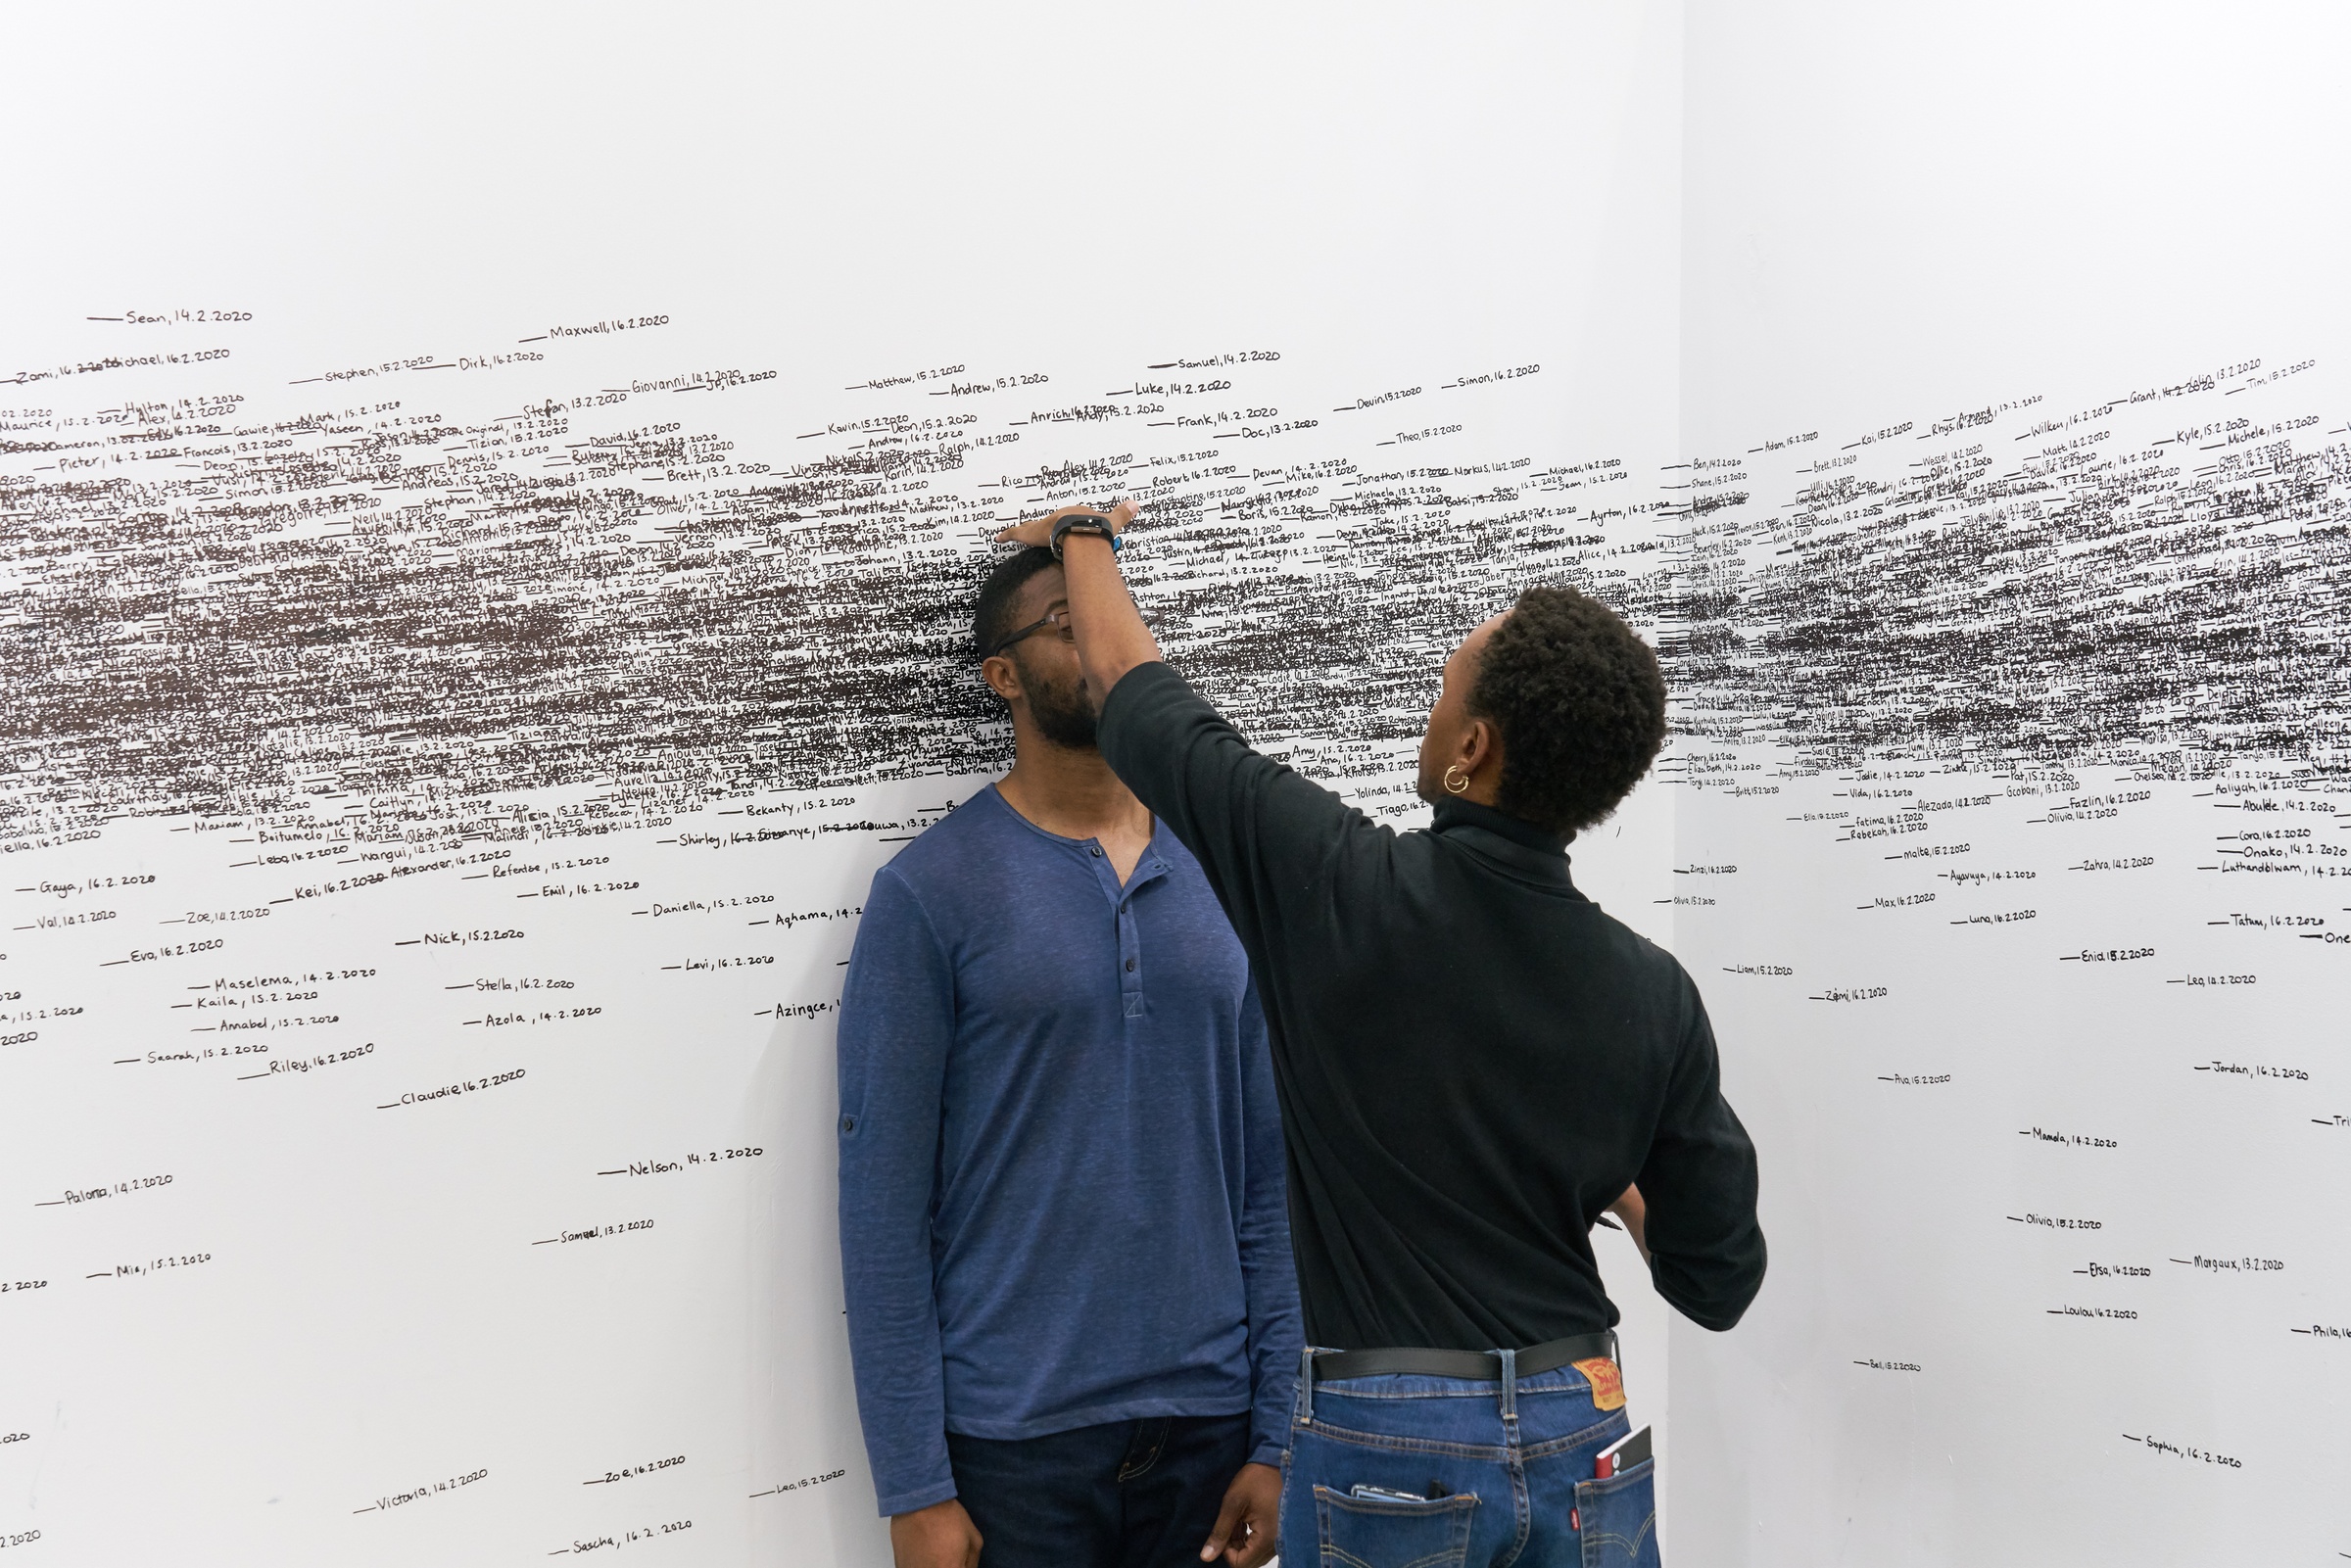 Event photograph of Roman Ondák’s performance piece ‘Measuring the Universe’ at A4’s booth at the 2020 Cape Town Art Fair. At the back, a white wall is covered with overlapping marks that indicate participant’s height, names and the date of their participation in black felt pen. At the front, A4’s Obakeng Motsepe measures the height of a fair attendee.
